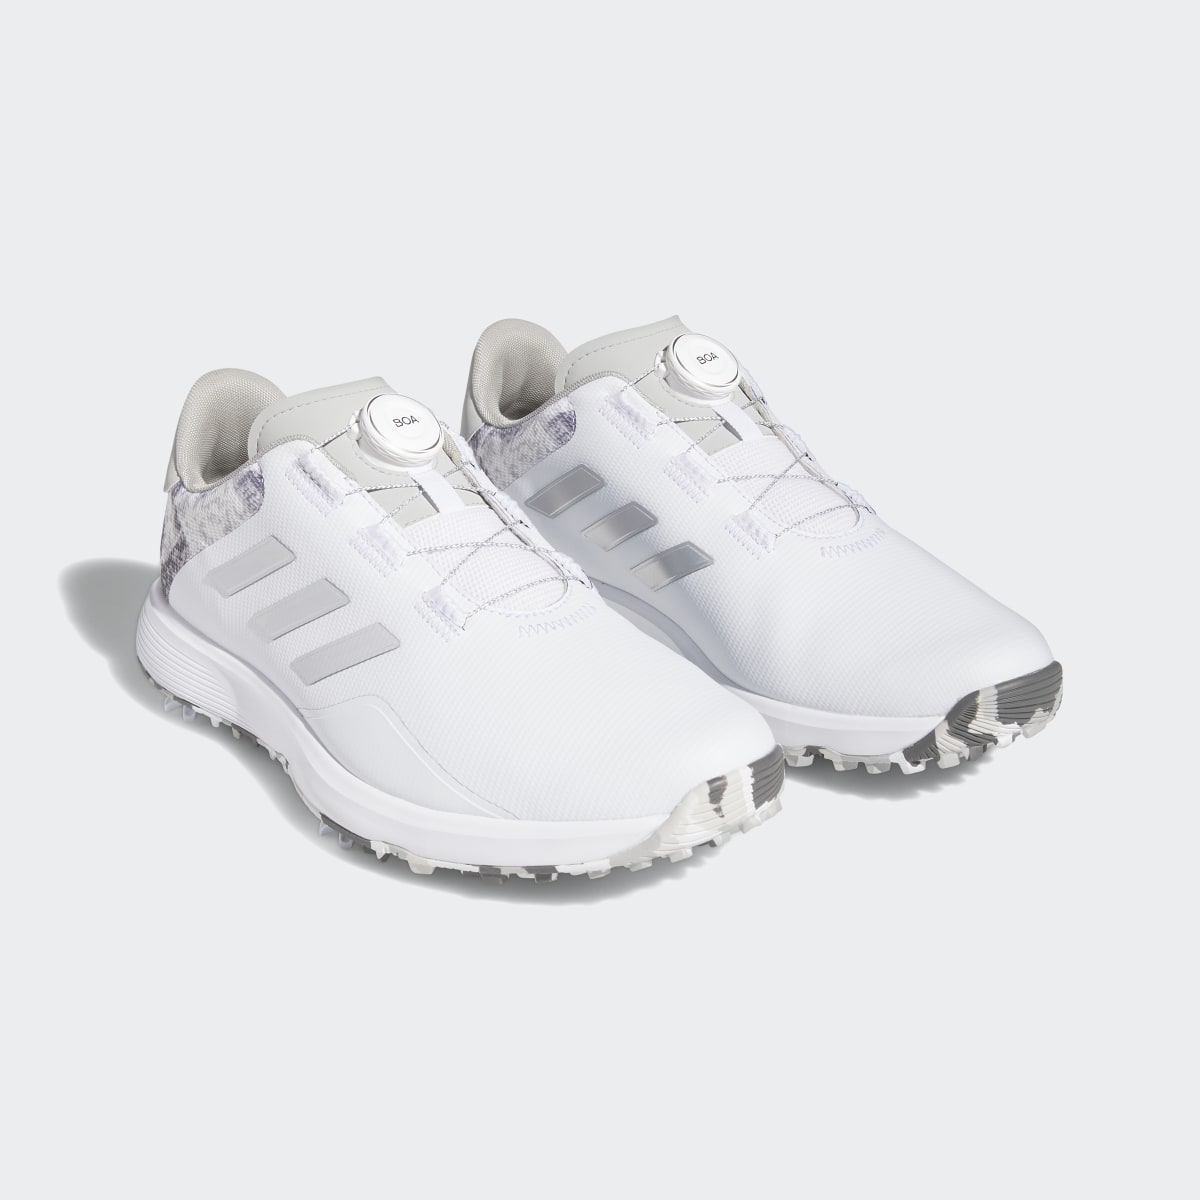 Adidas S2G BOA Wide Golf Shoes. 5